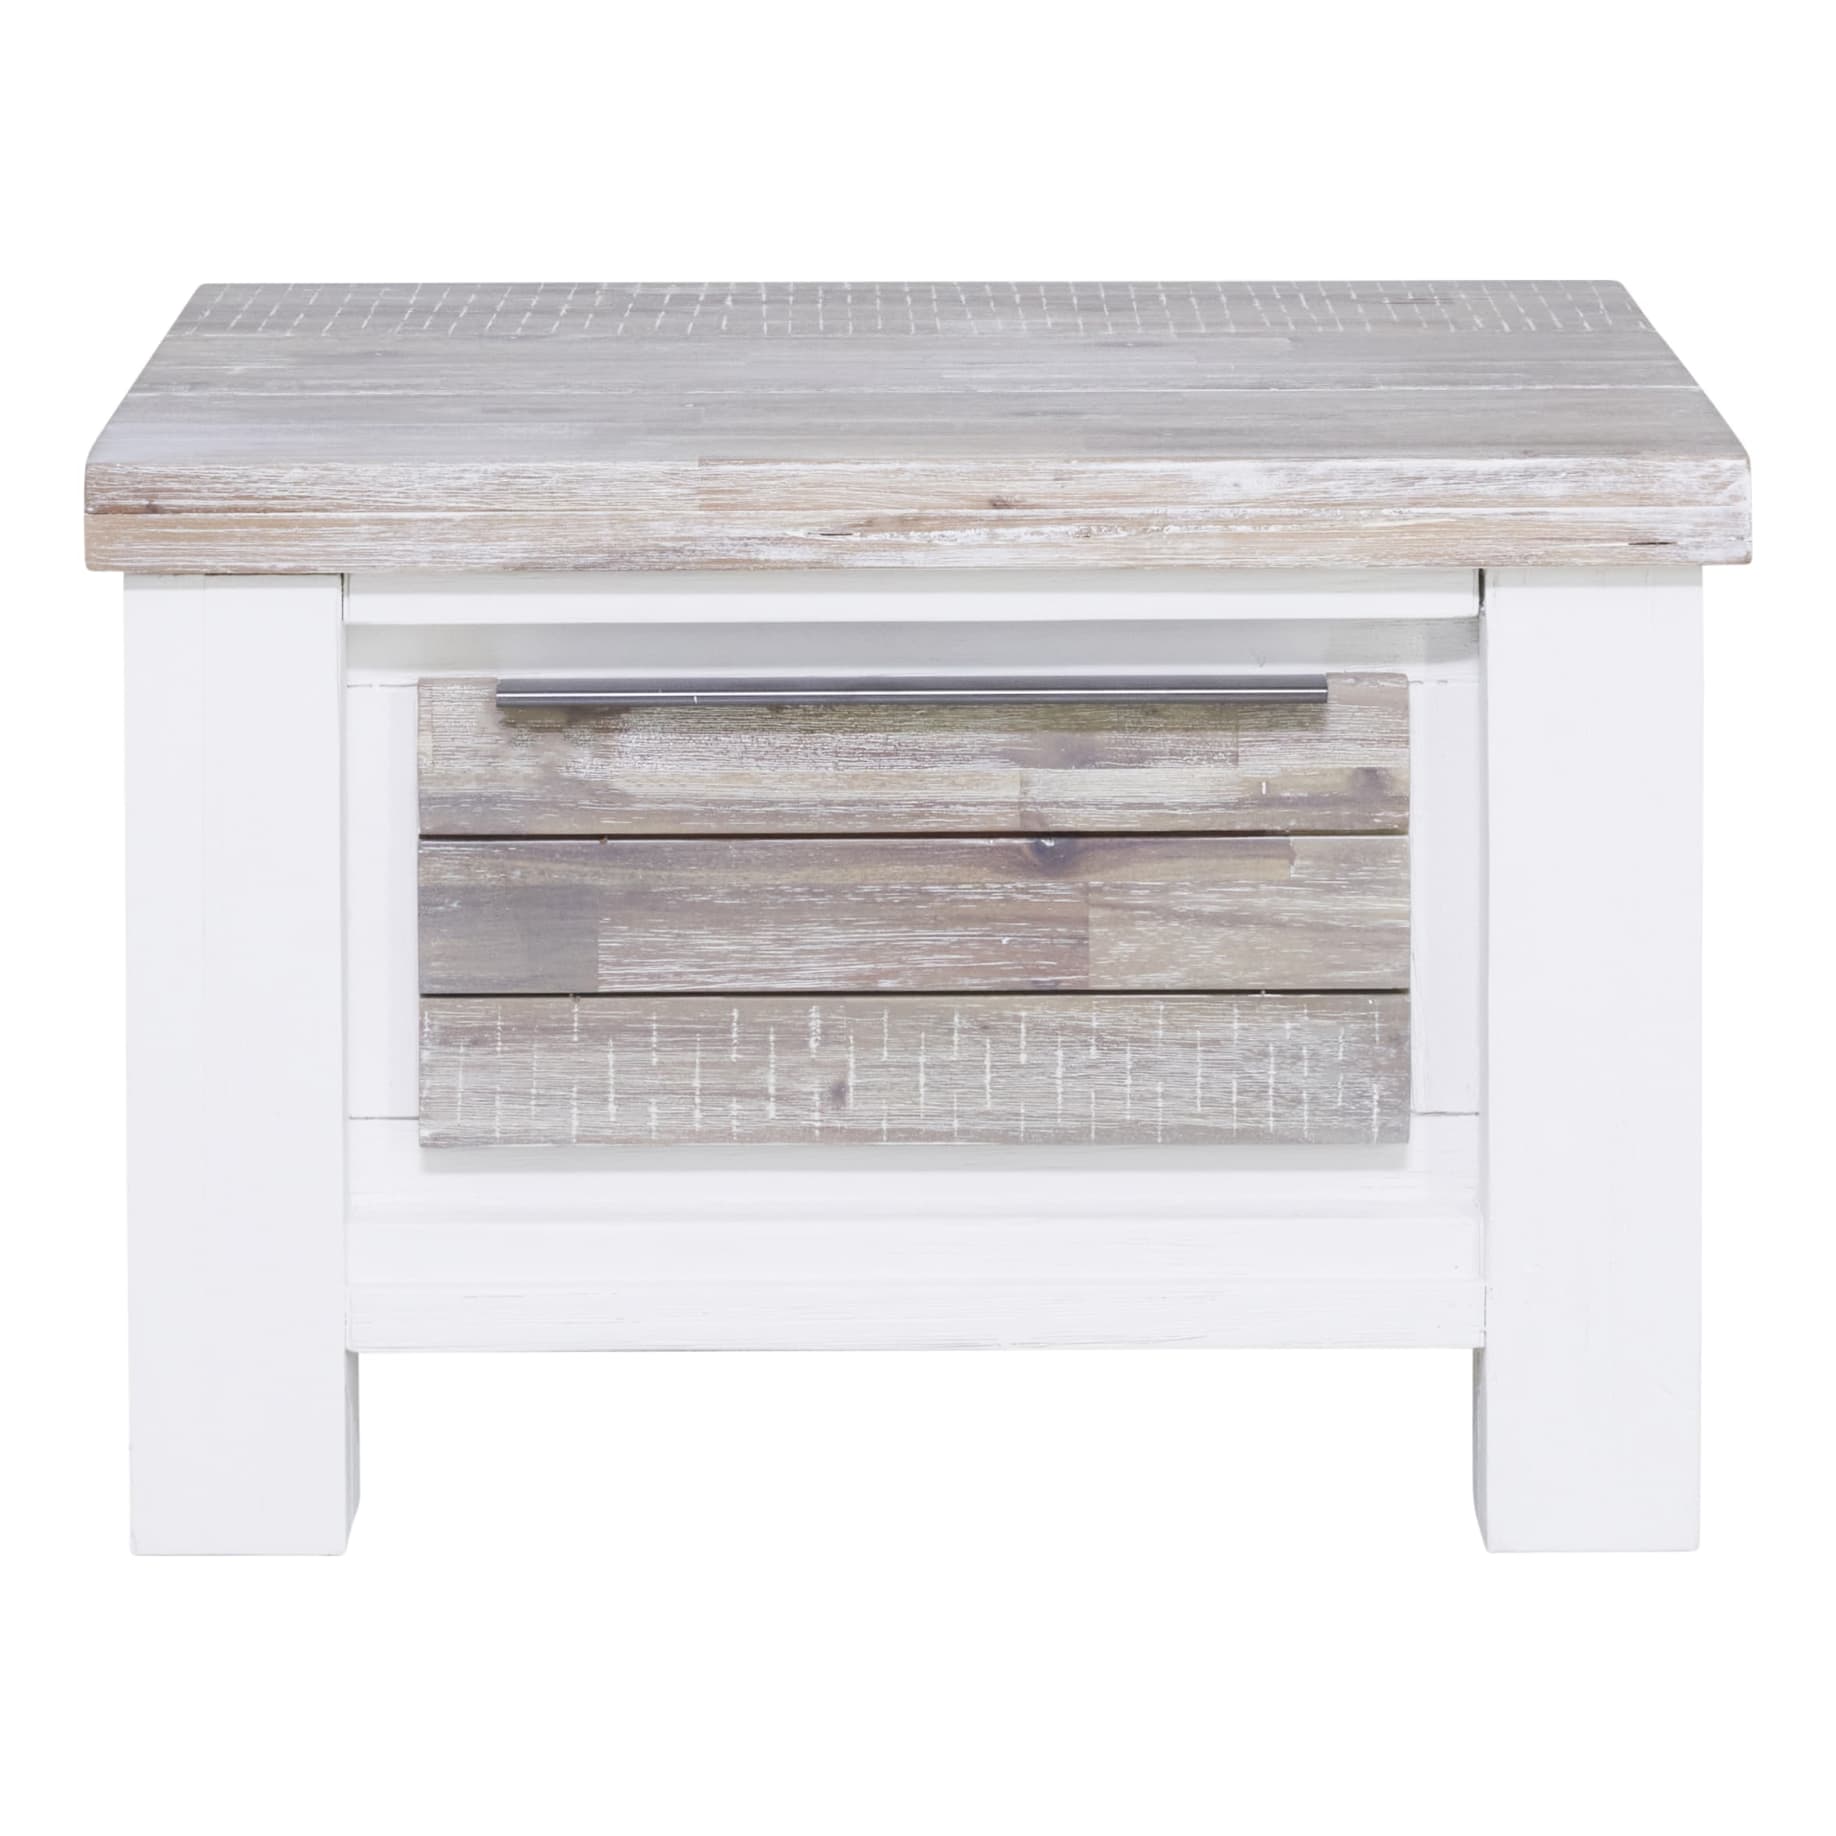 Halifax Side Table 60cm in Acacia Grey / White